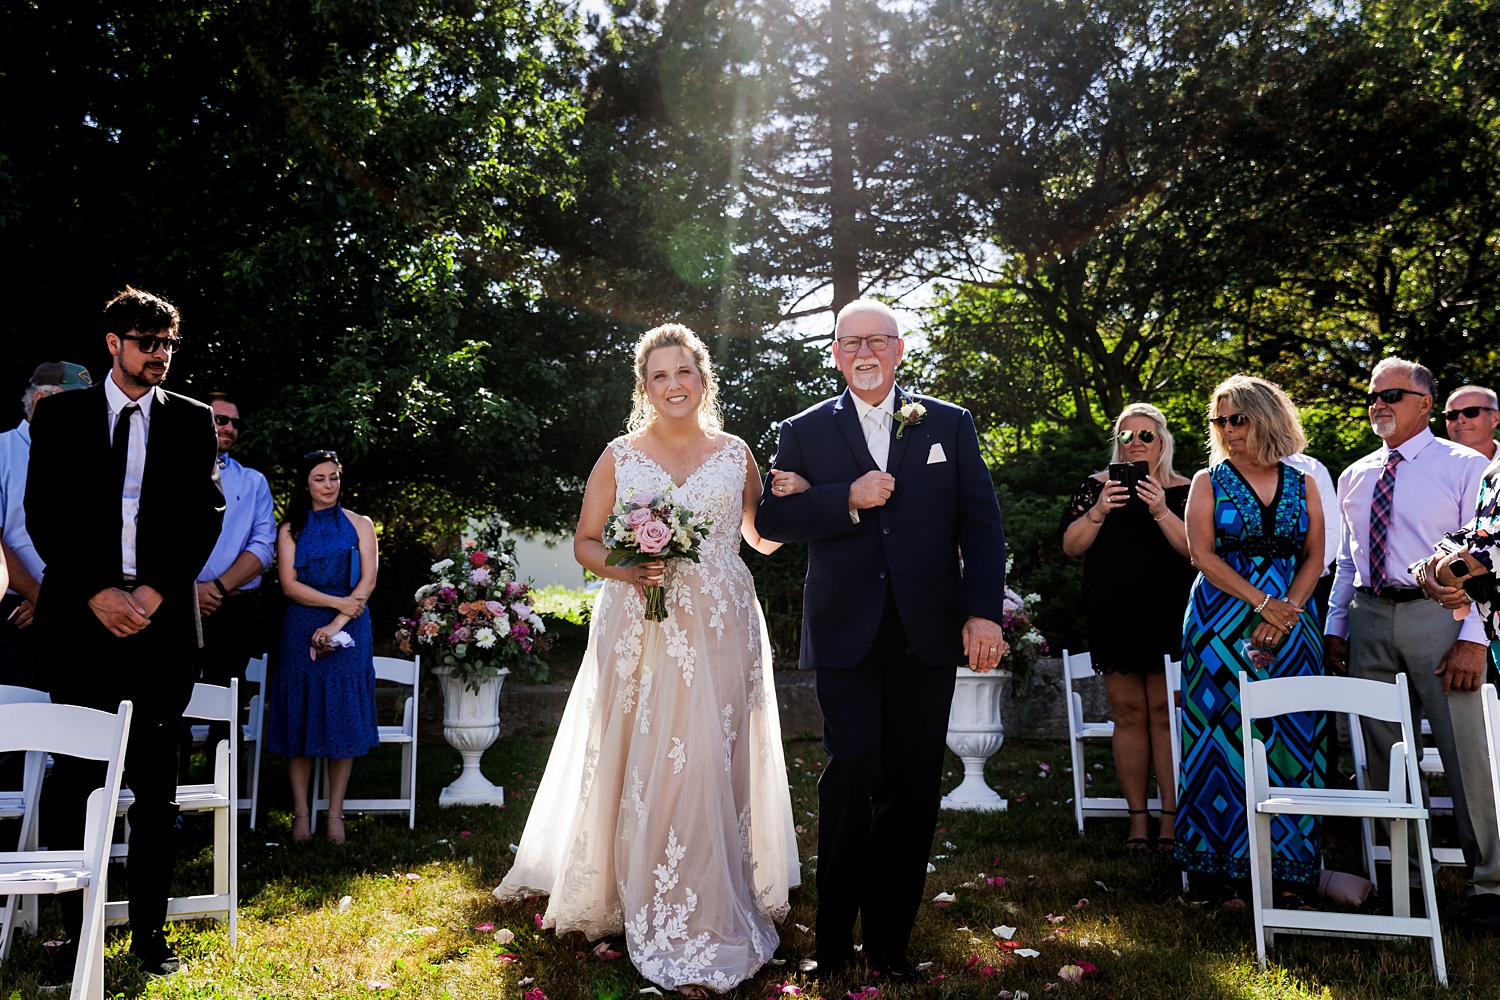 The father of the bride walks his daughter down the aisle